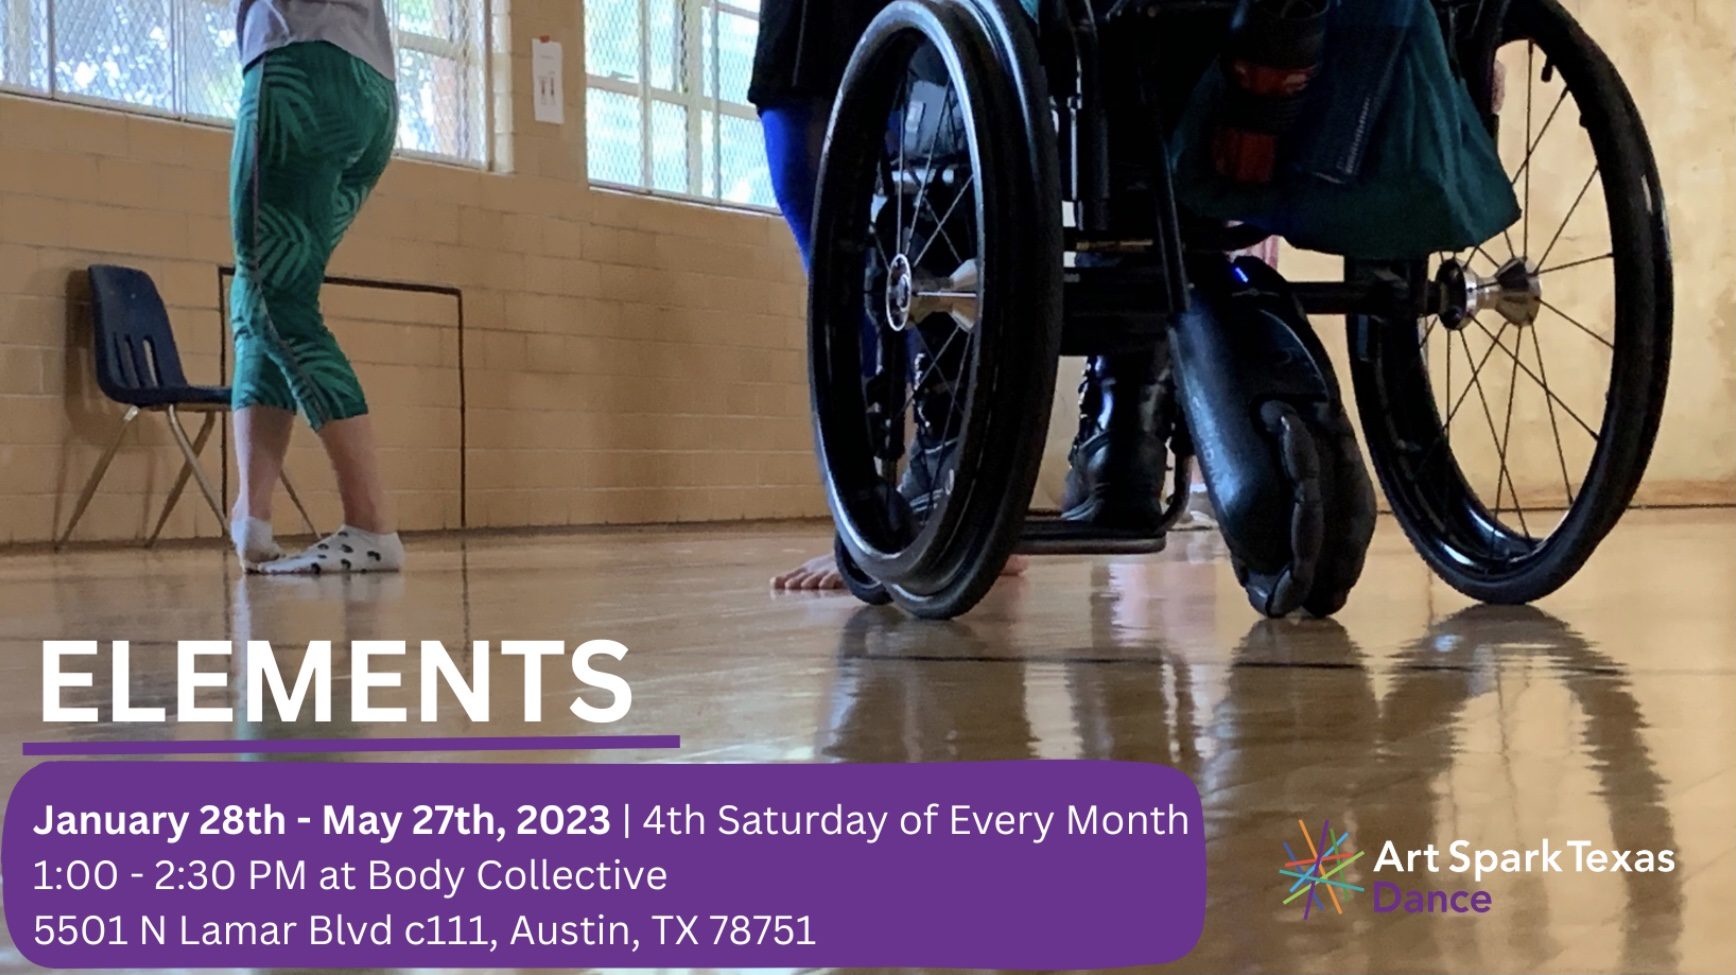 Promotional flyer for Elements classes shows a photo of a dance studio with a dancer in the background and a manual wheelchair in the foreground.